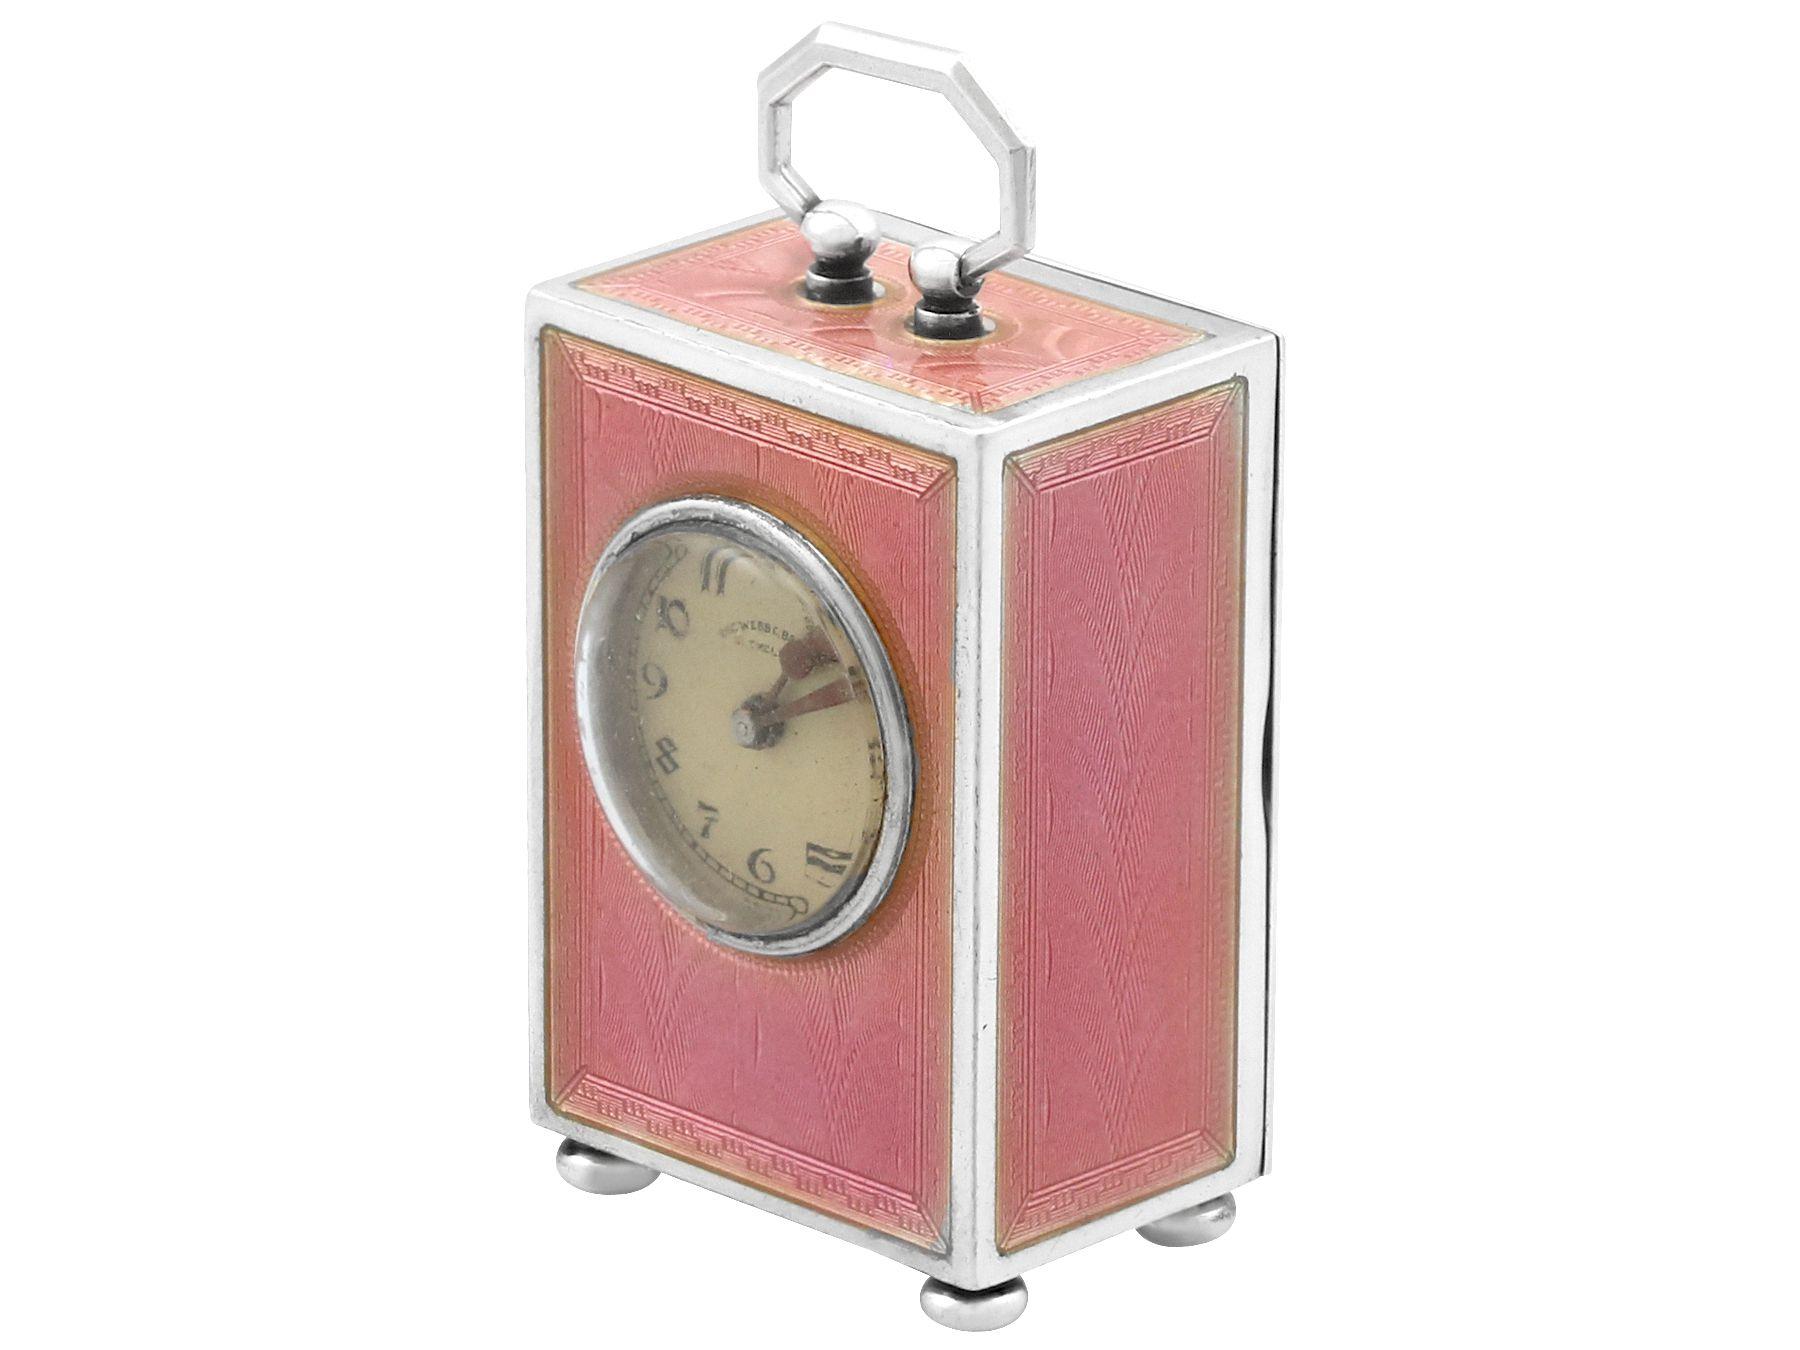 An exceptional, fine and impressive, antique Swiss silver and pink enamel miniature boudoir clock; an addition to our silver timepiece collection.

This exceptional antique Swiss silver miniature boudoir clock has a plain rectangular form.

The